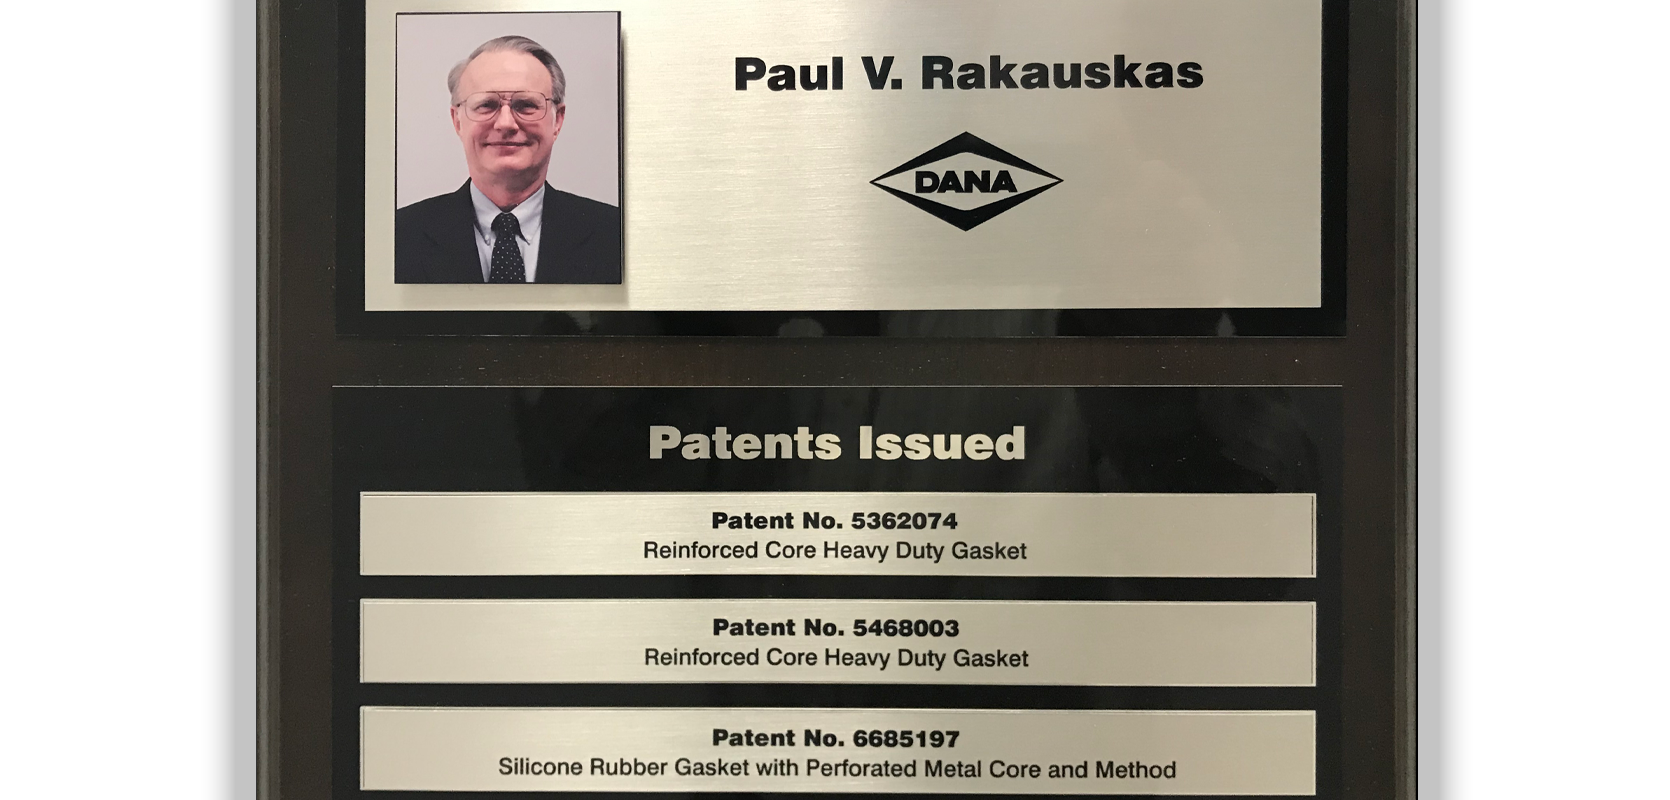 Rakauskas holds two patents for a reinforced core heavy-duty gasket material, and one for a silicone foam on core material.